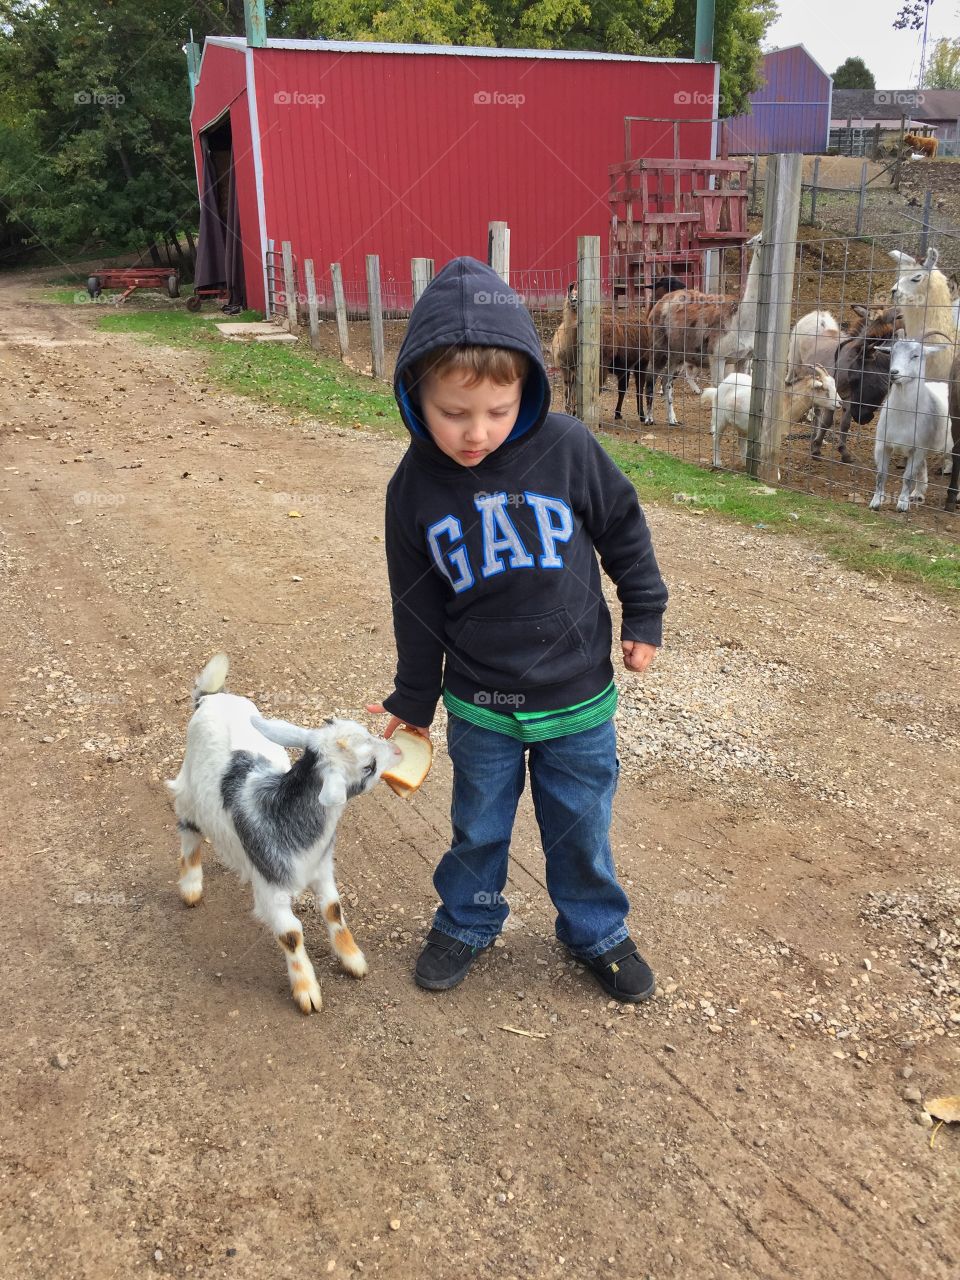 Feeding the baby goats . Day at the farm trying to find the perfect pumpkin